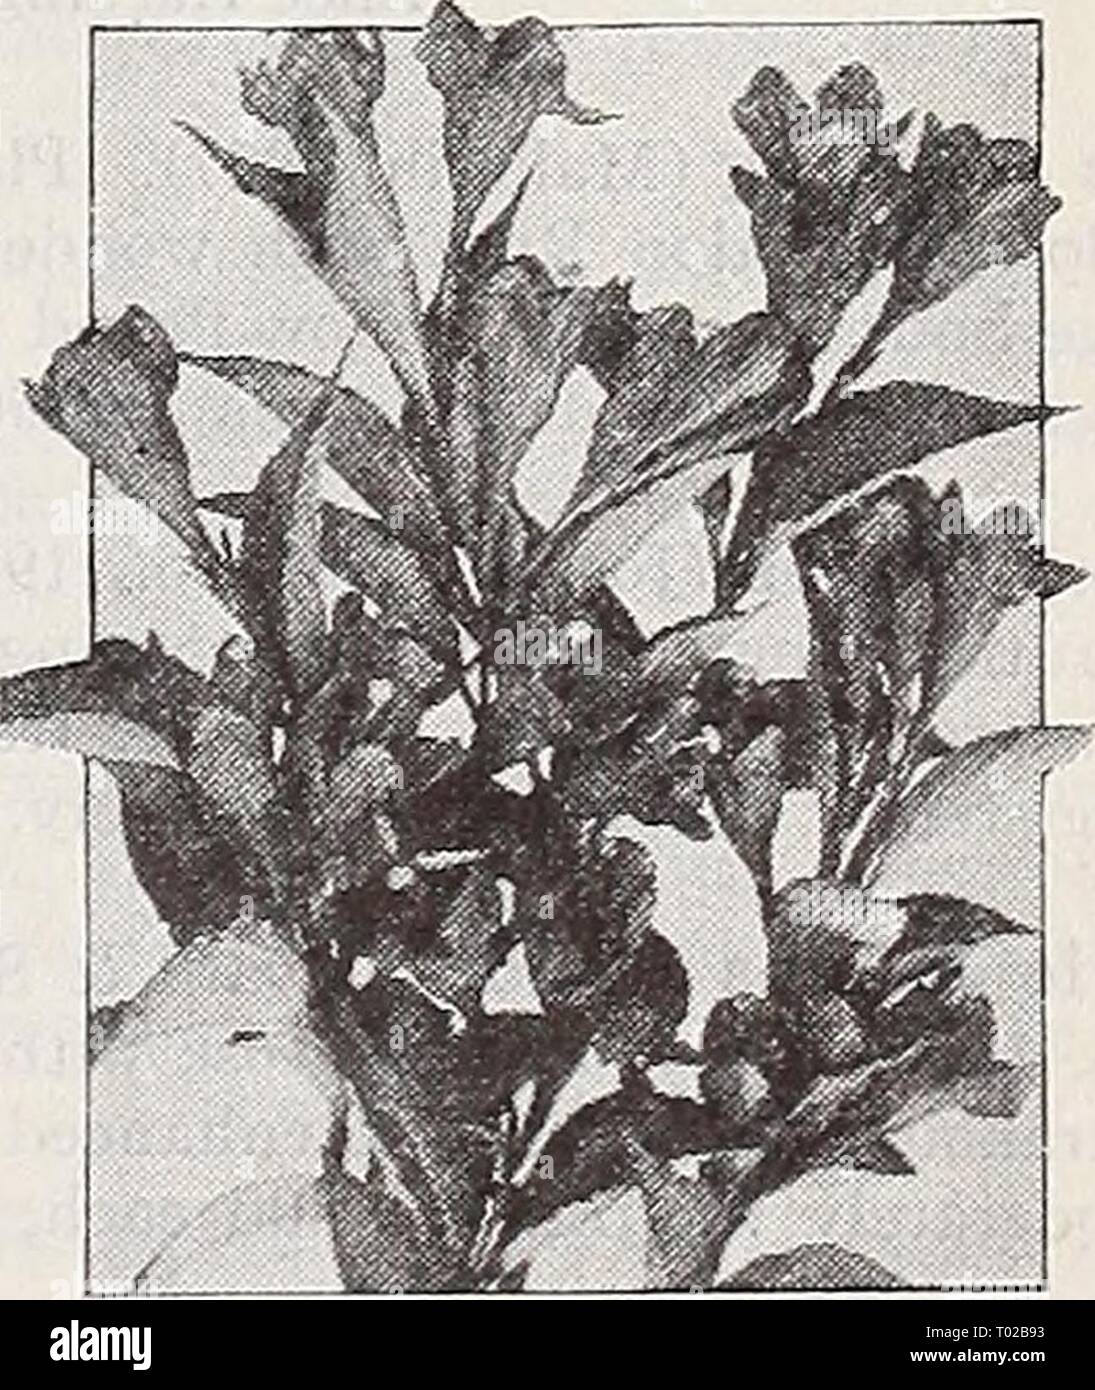 Dreer's garden book 1939 : 101 years of Dreer quality seeds plants bulbs . dreersgardenbook1939henr Year: 1939  Vitex macrophylla Witex.—Chaste Tree (T) Macrophylla. A graceful shrub with attractive spikes of lovely lavender-blue flowers. Blooms profusely from July until fall and grows more than 10 feet high unless pruned back. It is a most desirable summer-flowering shrub of distinctive appearance. Strong plants, size 15-18 in., 75c each; $7.50 per doz.    Weigela Eva Rathke Weigela (M) Diervilla Eva Rathke. Richly colored ruby flowers on plants 4-5 ft. tall. Blooms profusely during the summe Stock Photo